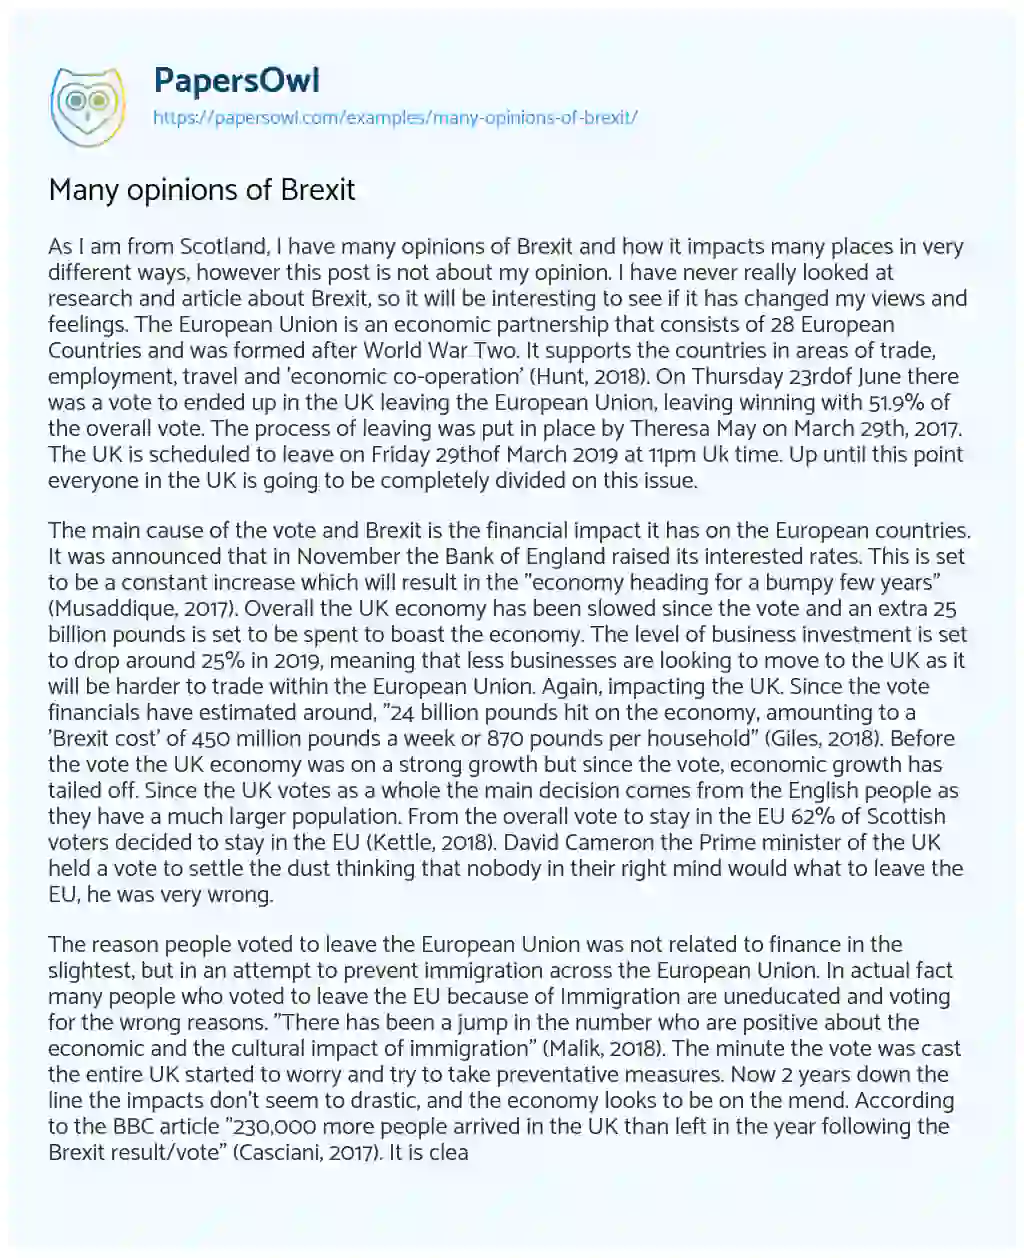 Essay on Many Opinions of Brexit